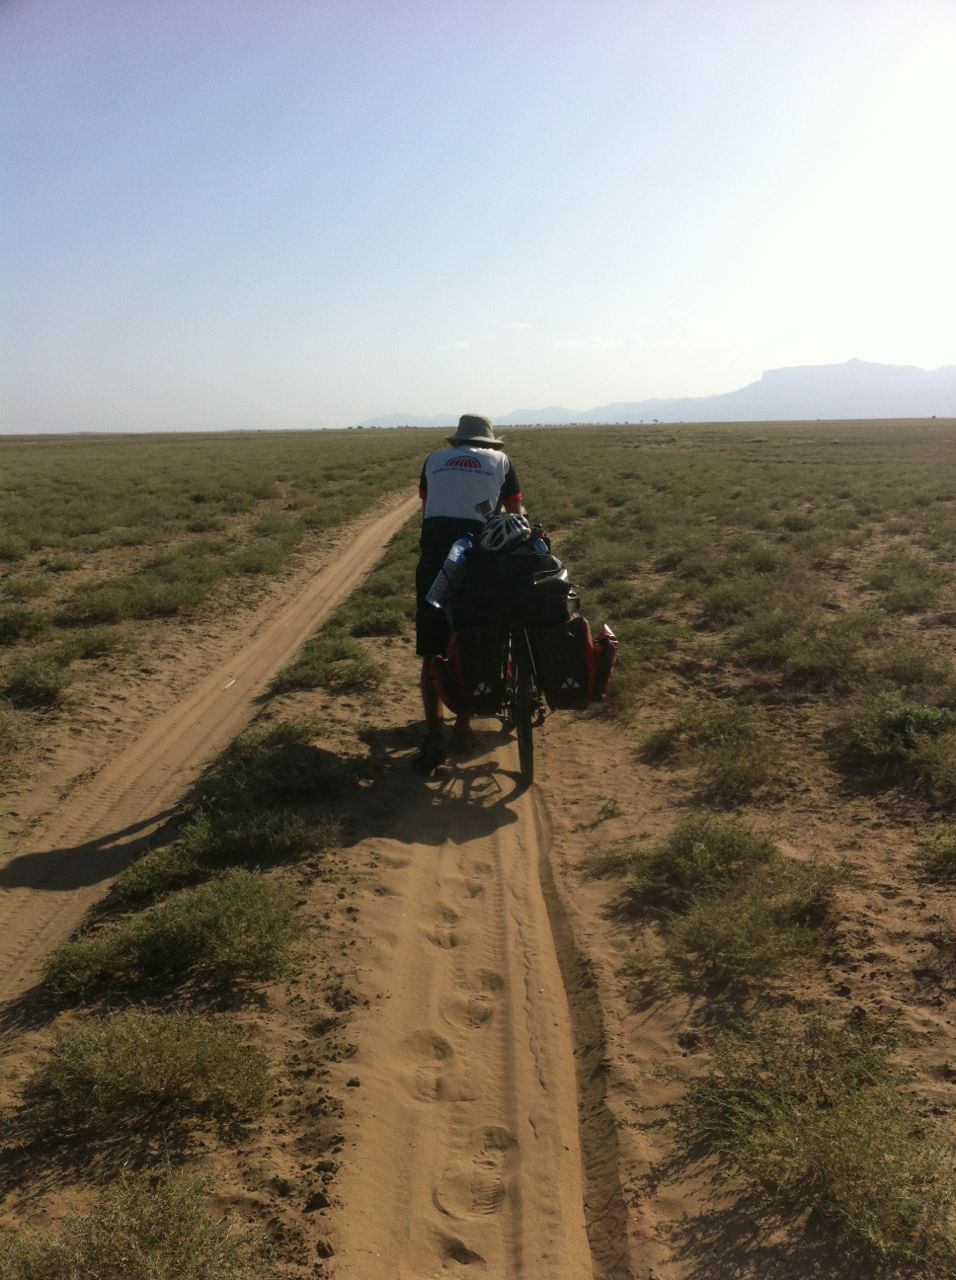 Hauling our bikes through the sand in the no-mans-land between Ethiopia, South Sudan and Kenya